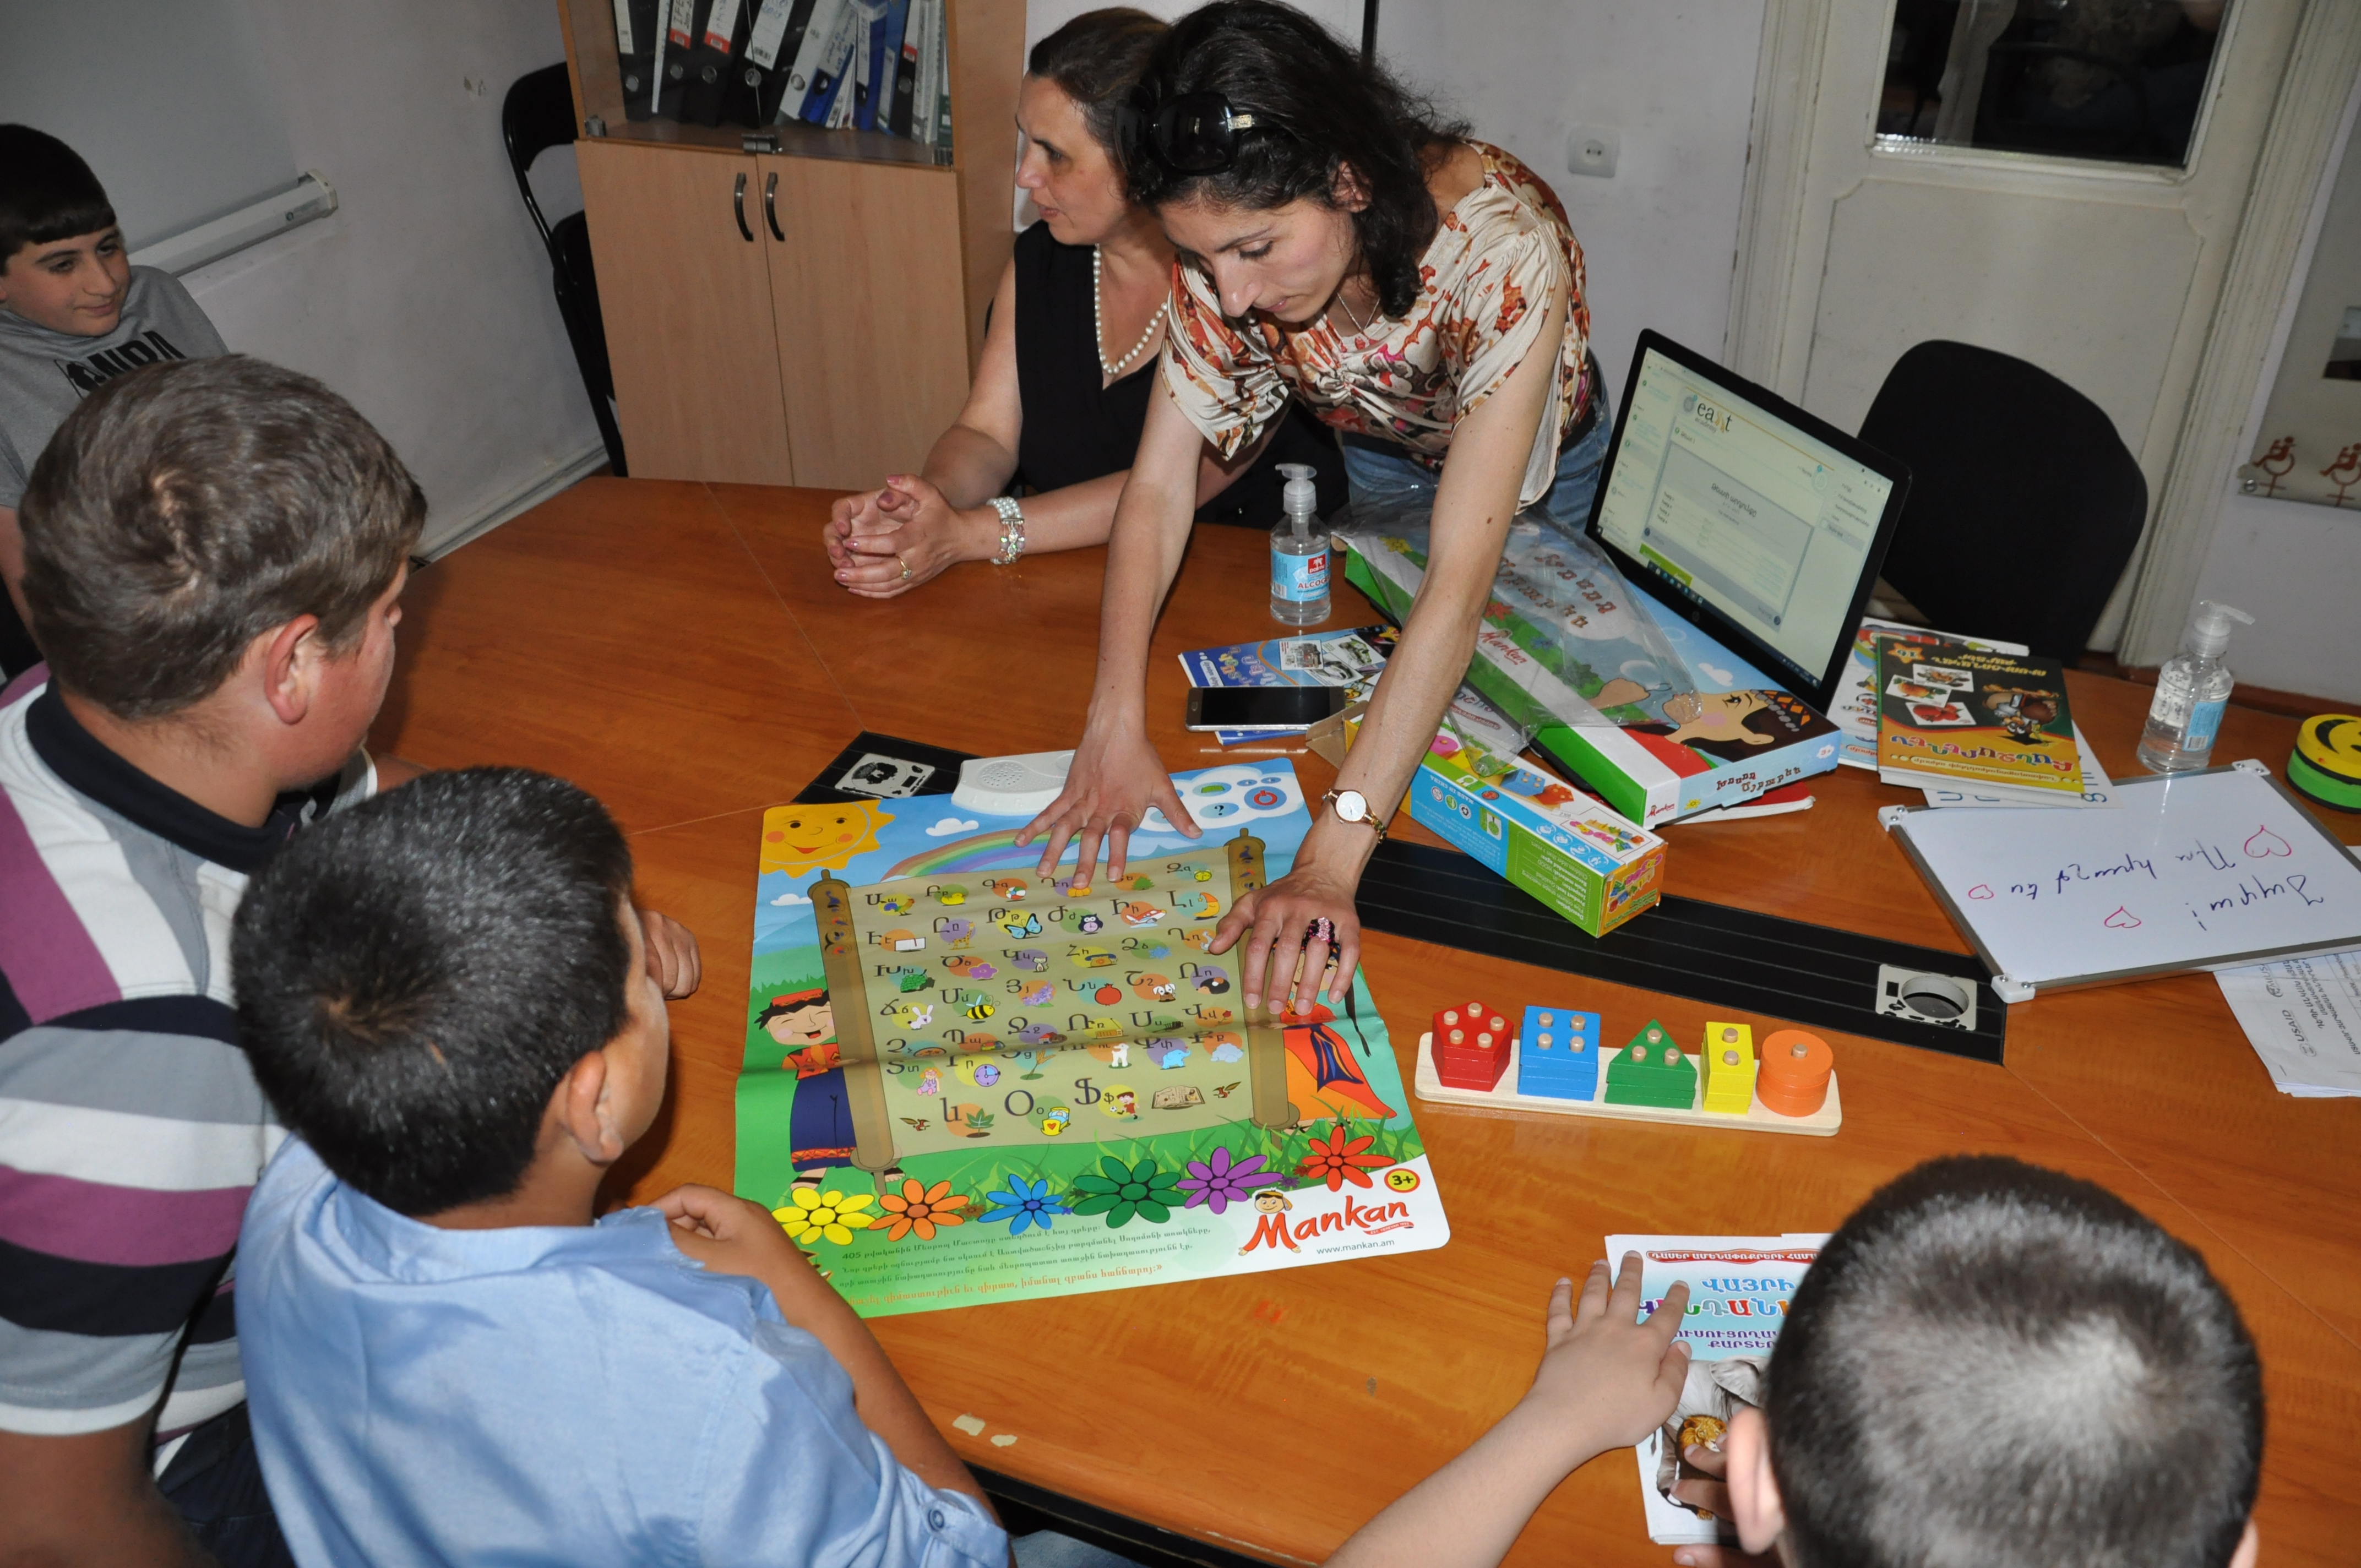 Elisa works with children at the Independent Life Resource Centre. Photo: Lena Hovhannisyan/Agate NGO.